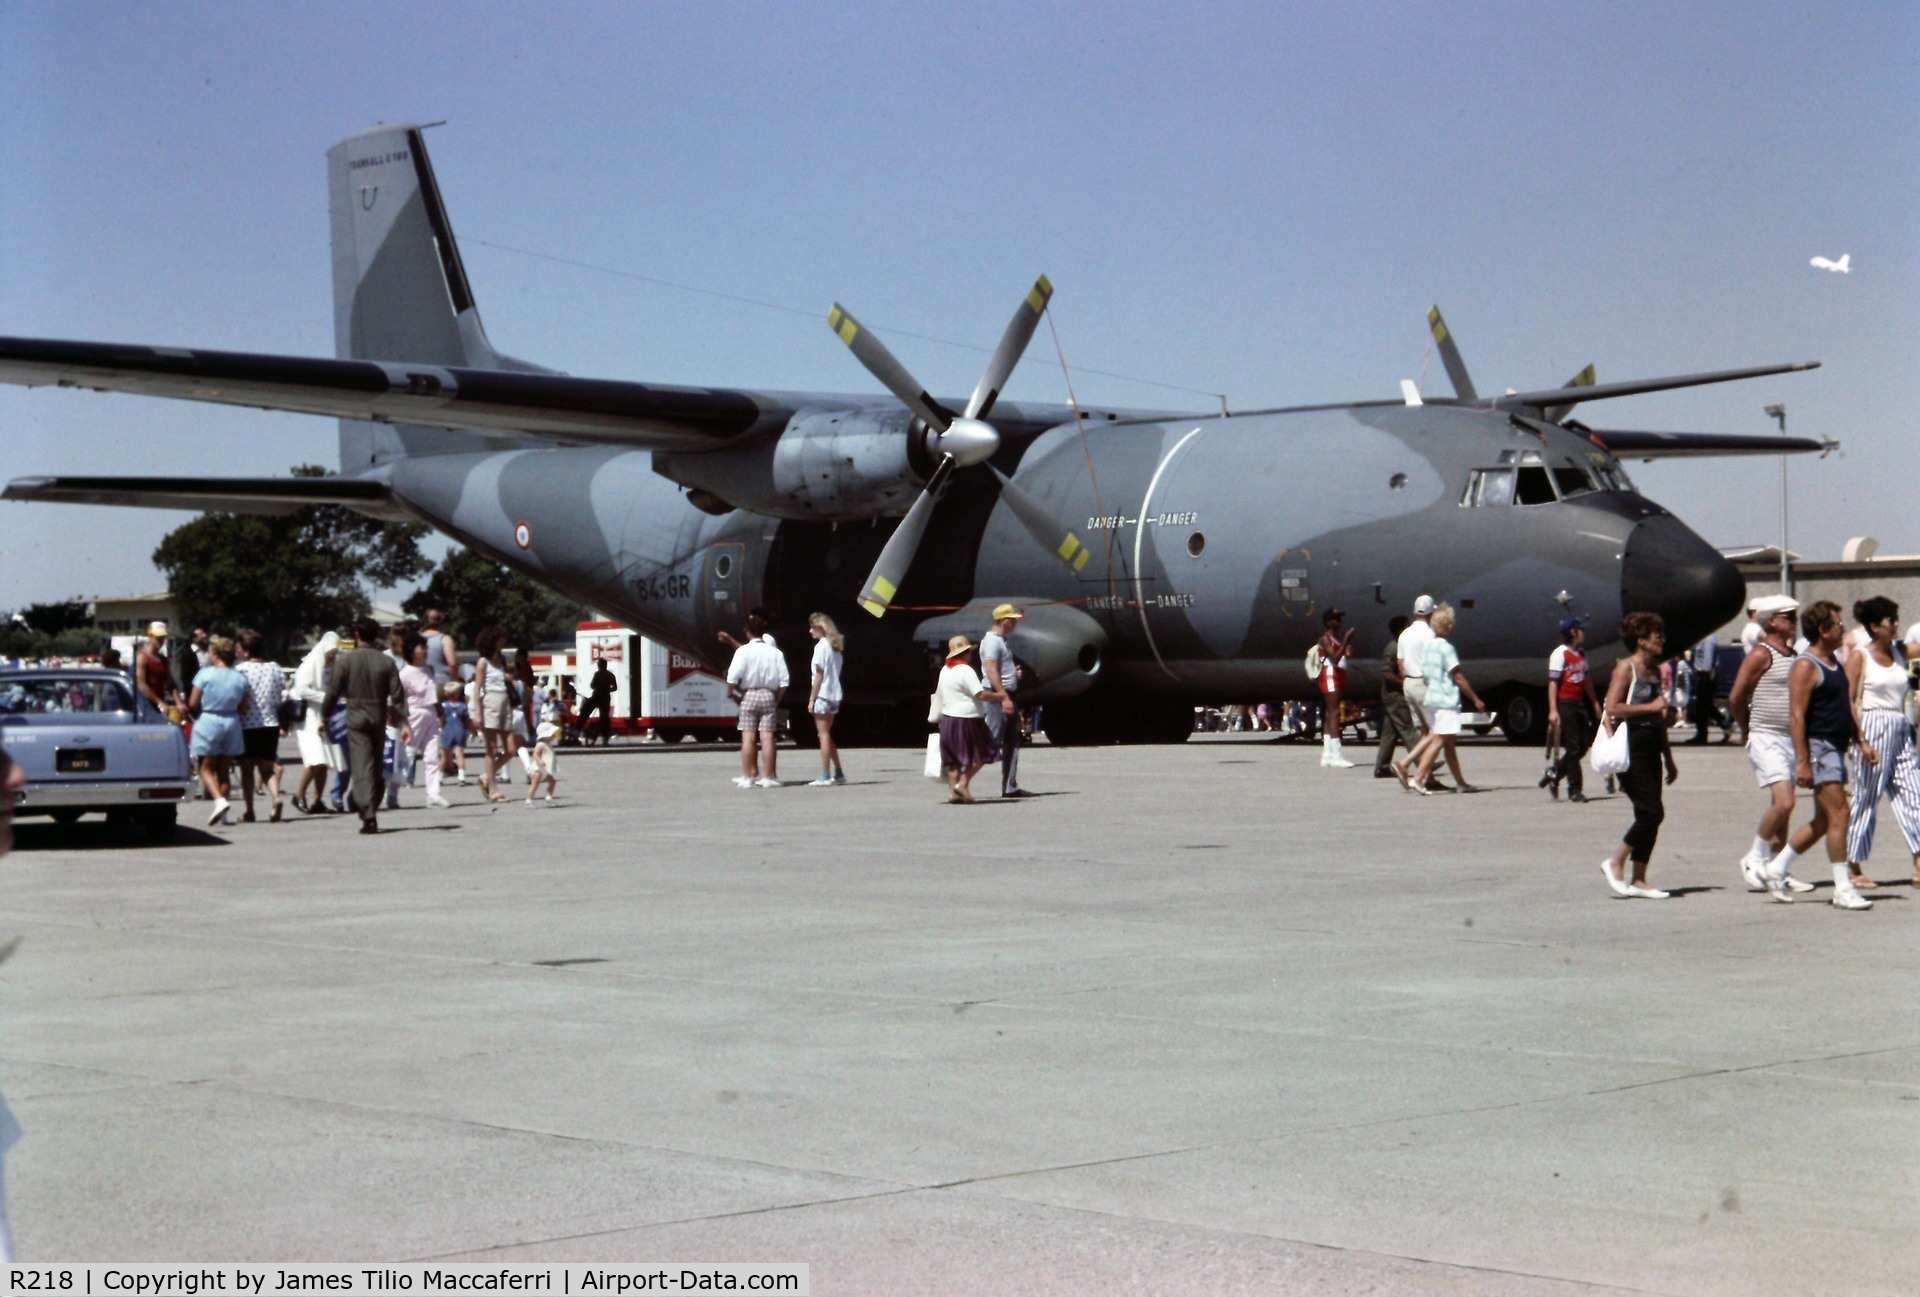 R218, Transall C-160R C/N 221, Travis Air Force Base, Calif., open house, August 1986. Support aircraft for Patrouille de France